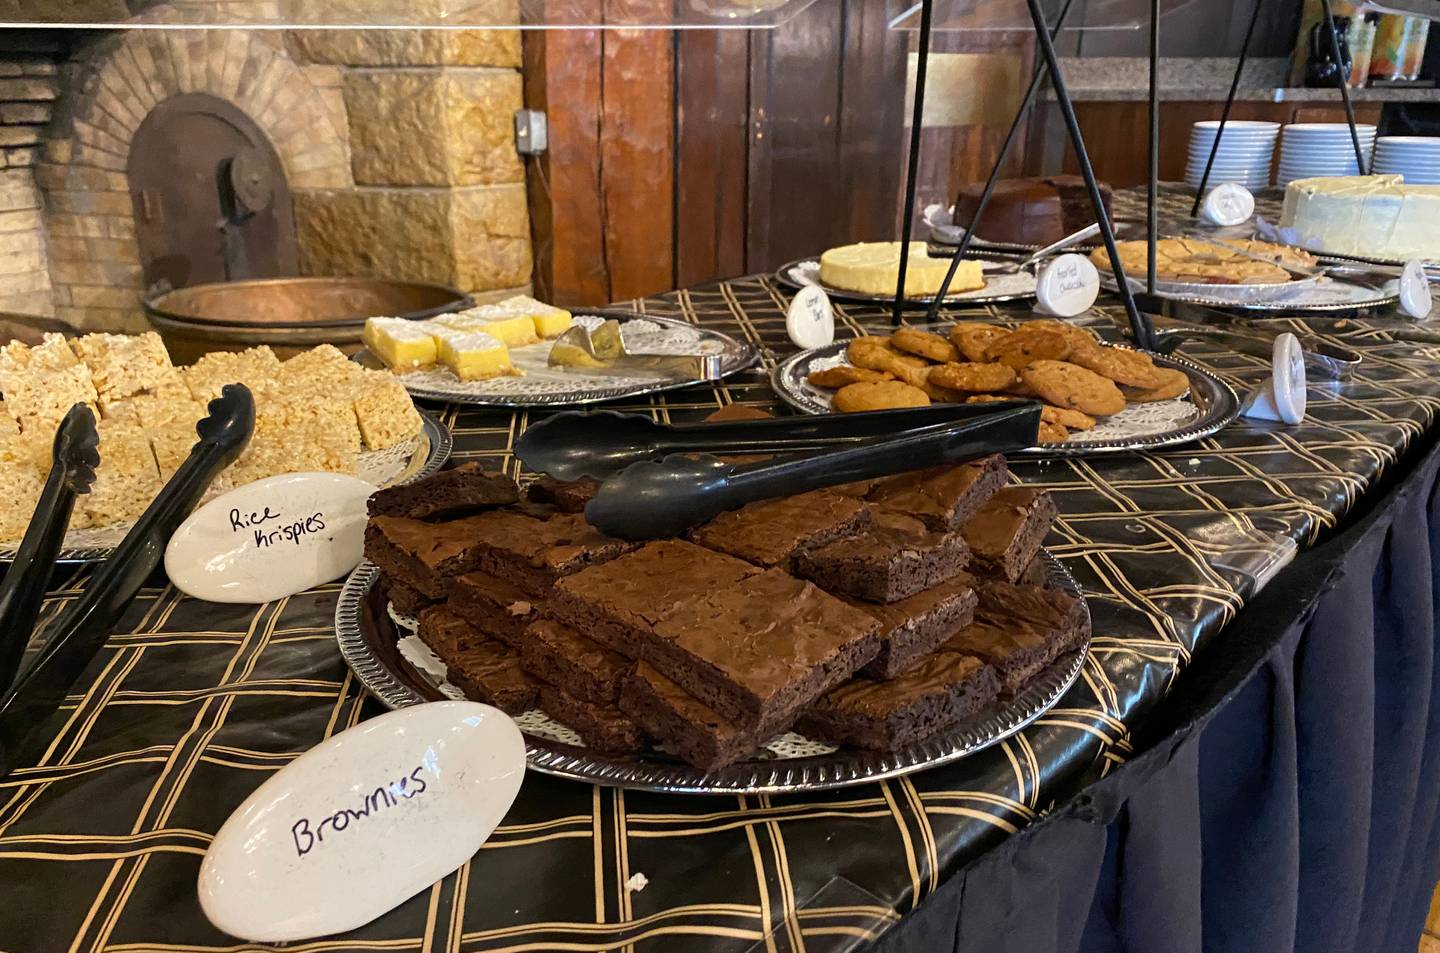 Delicious desserts are out in force to end a meal at Starved Rock Lodge's Sunday brunch buffet.